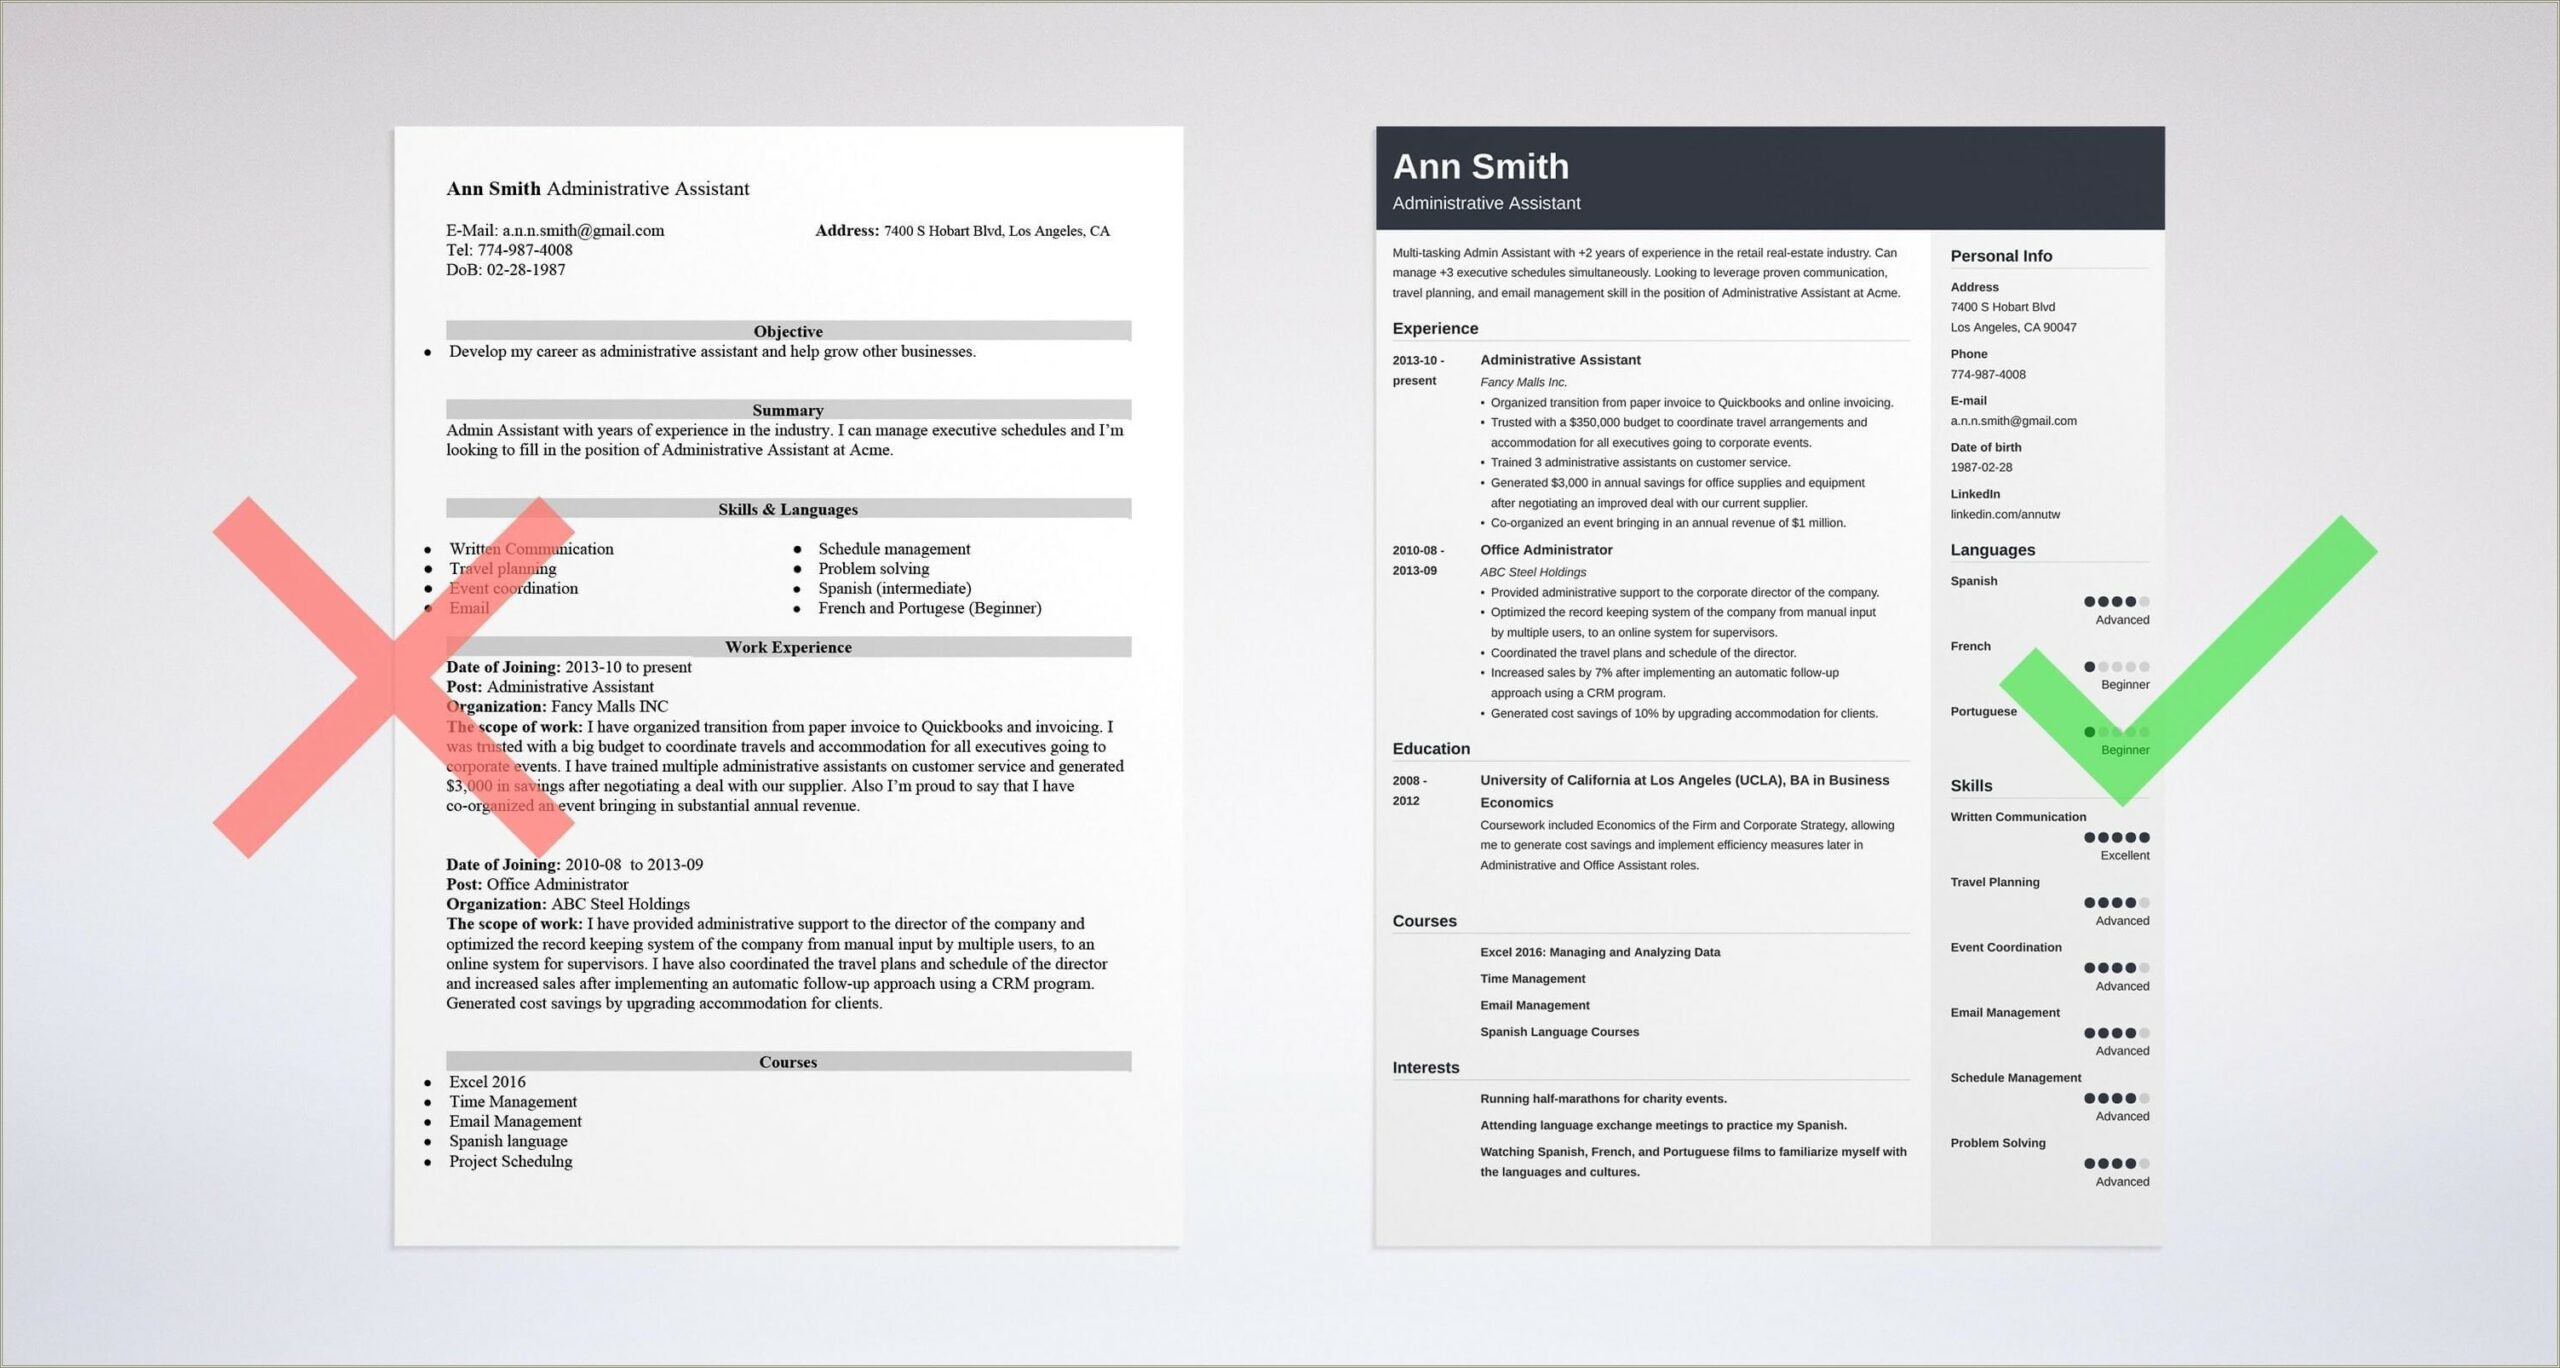 Administrative Assistant Skills To List On Resume